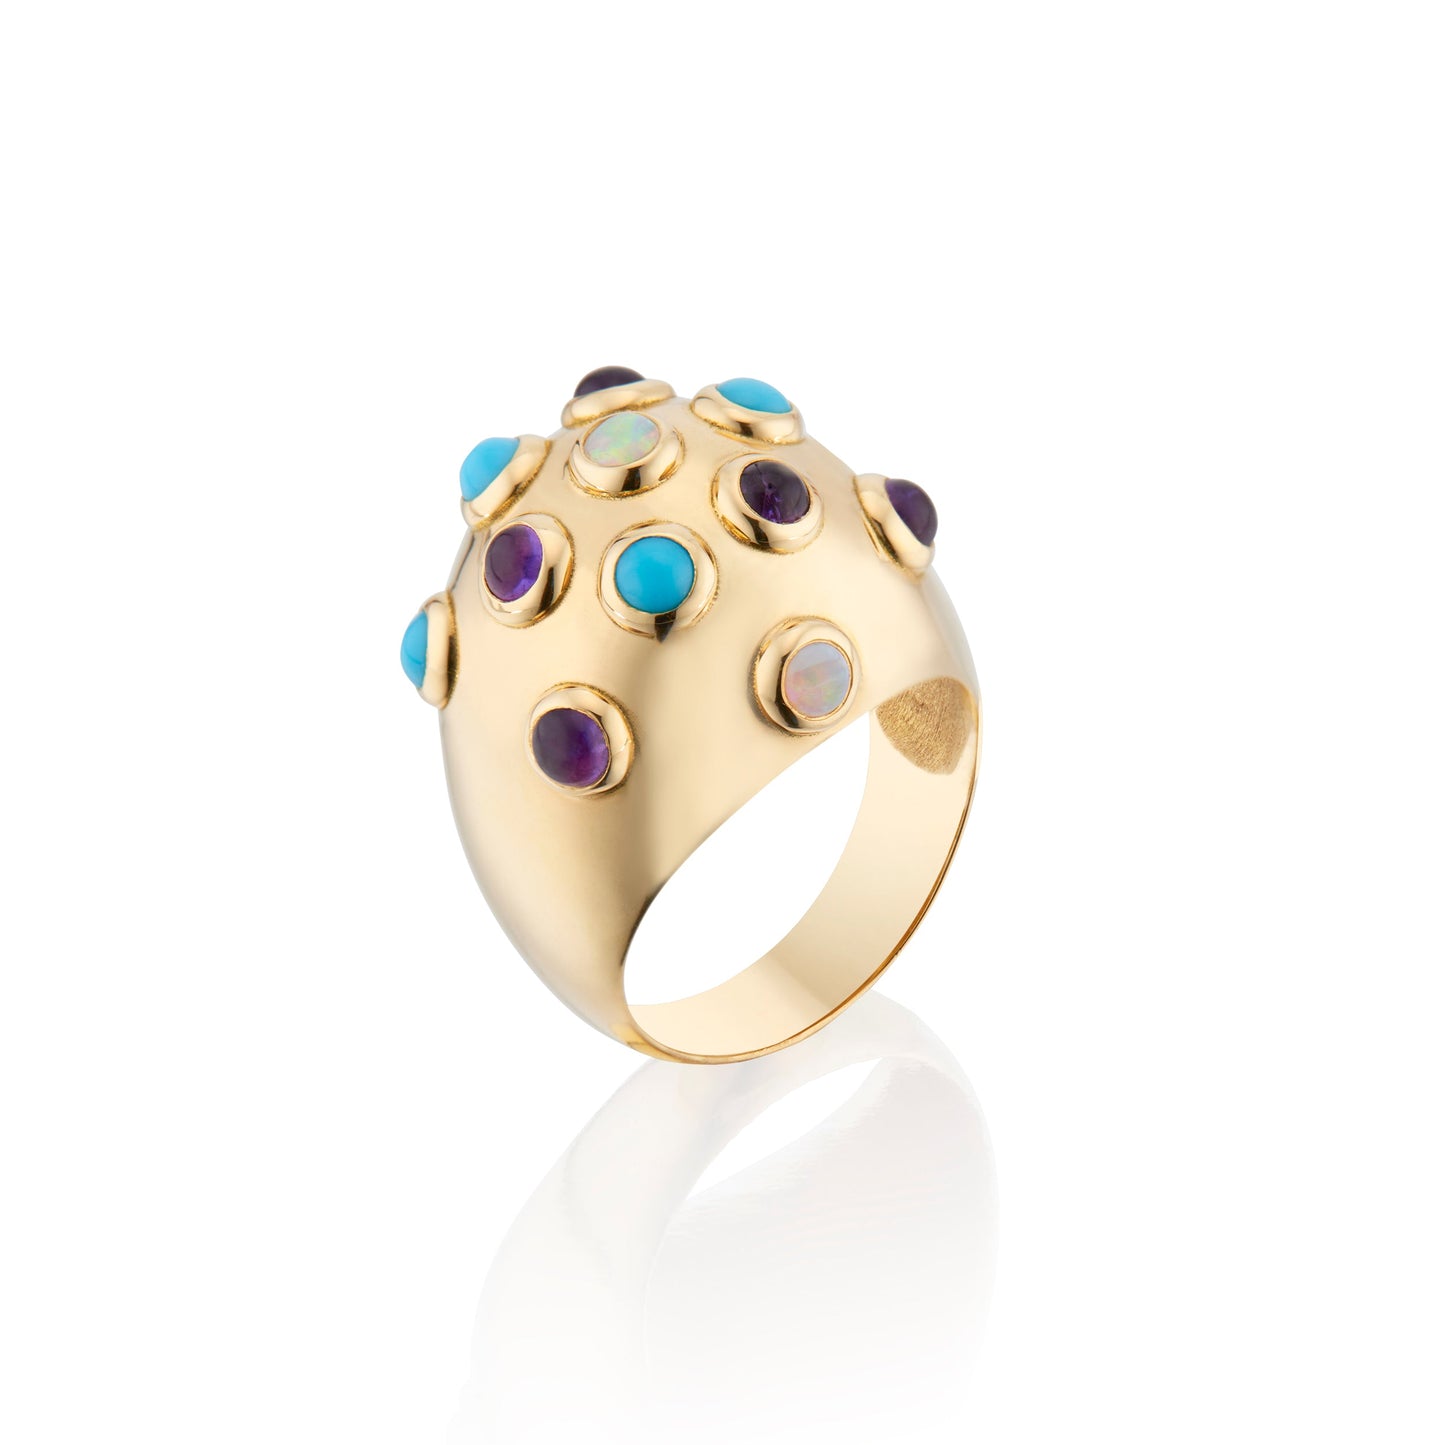 Deco Dome Ring with Opals, Amethysts and Turquoise Gemstones